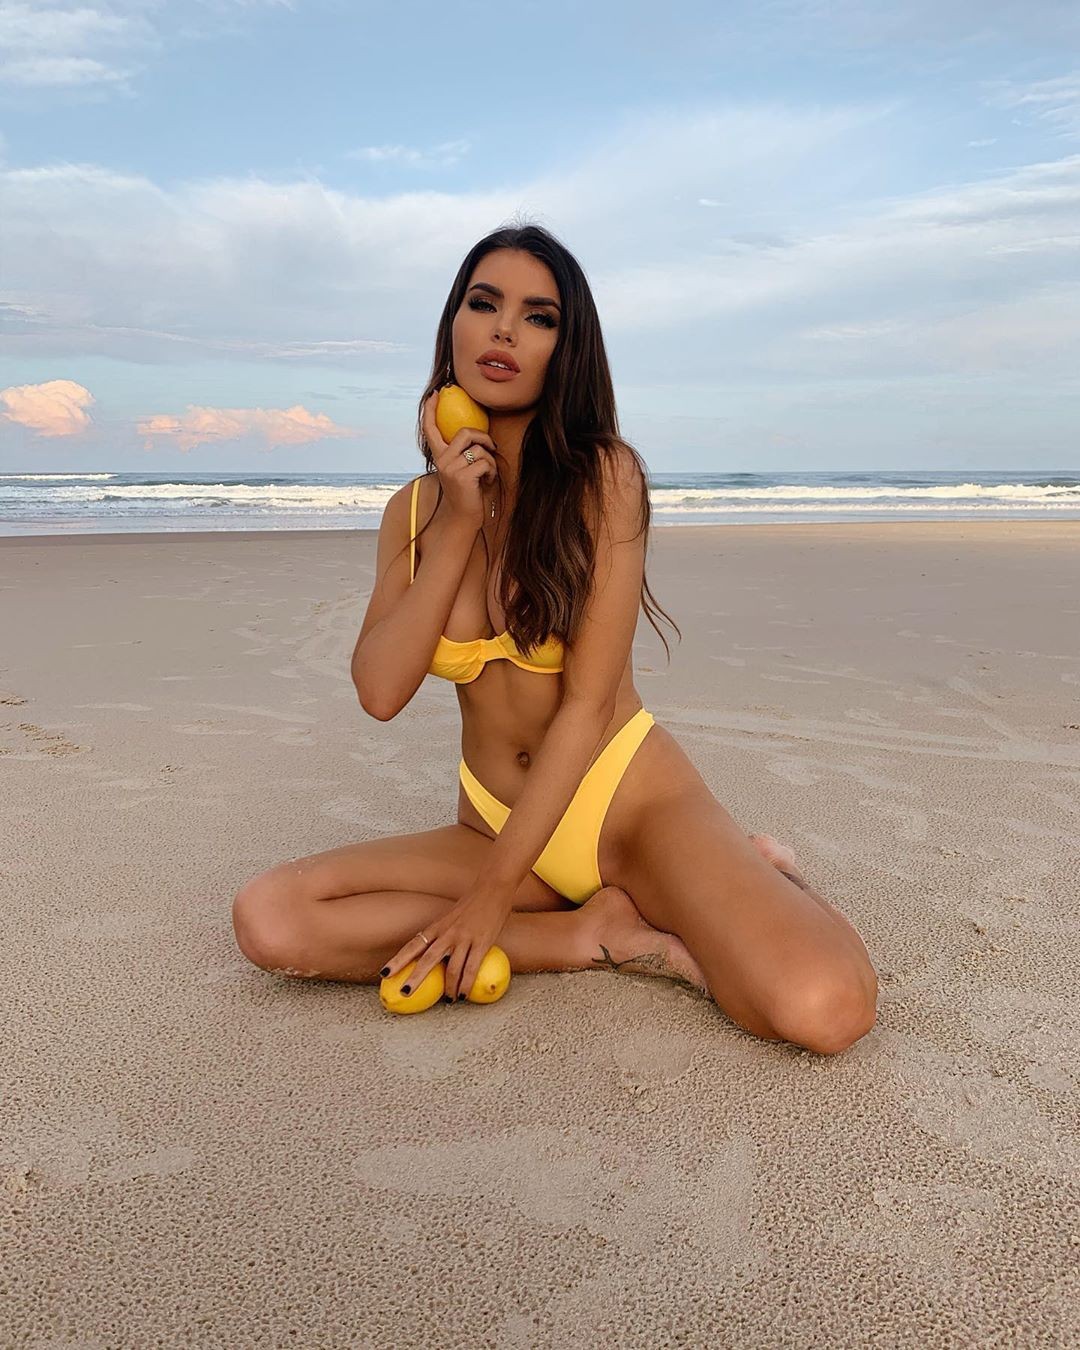 Nicole Thorne Sexy Independence Day 4 - Nicole Thorne Sexy (18 Photos and Videos)